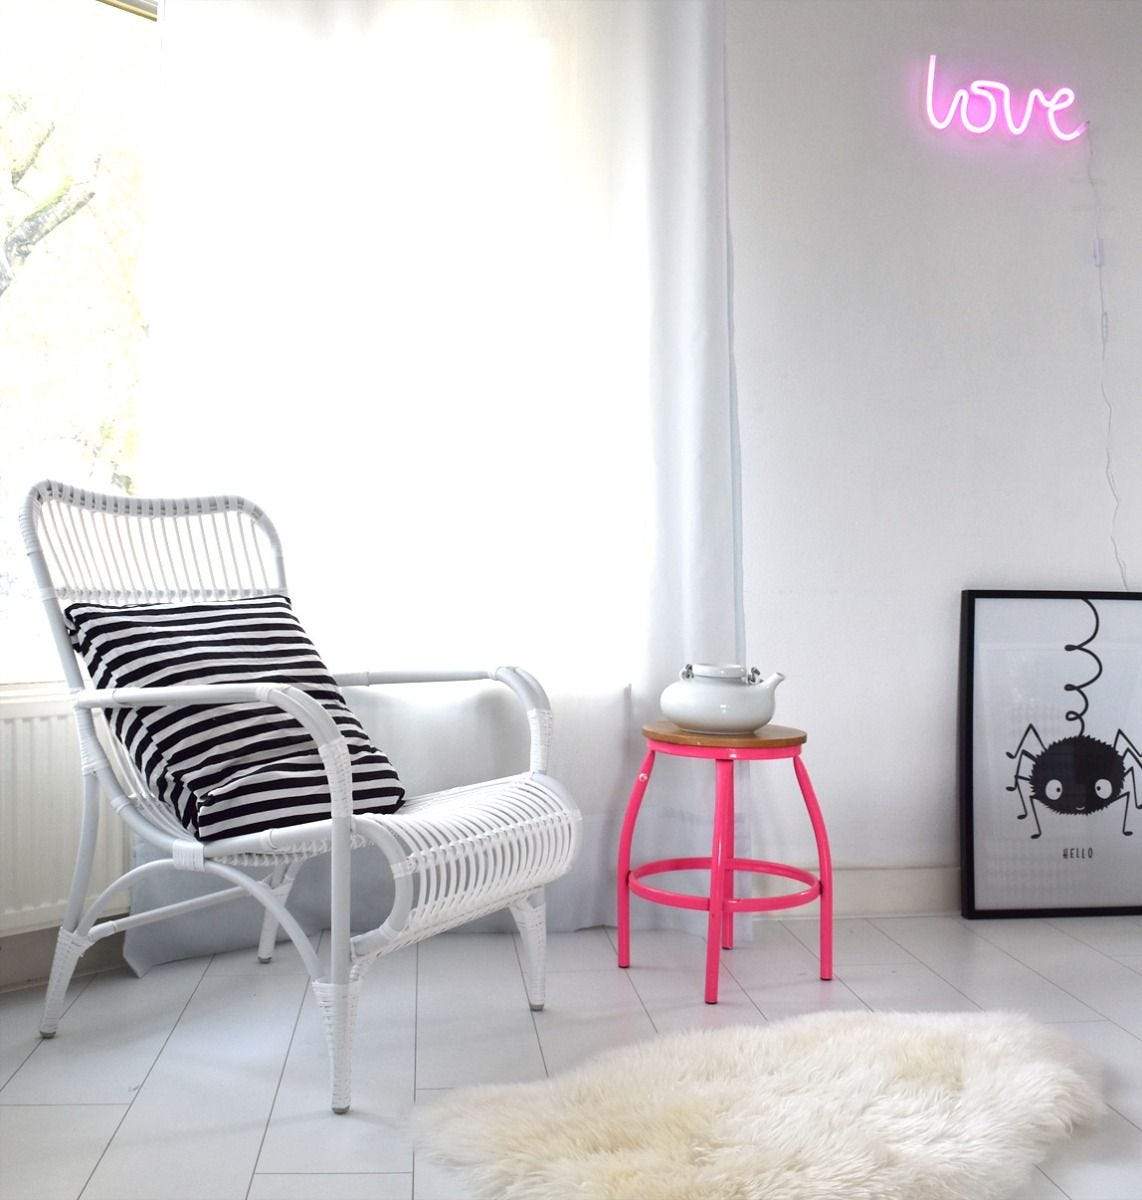 A Little Lovely Company Love Neon Wall Light in Pink - Scandibørn